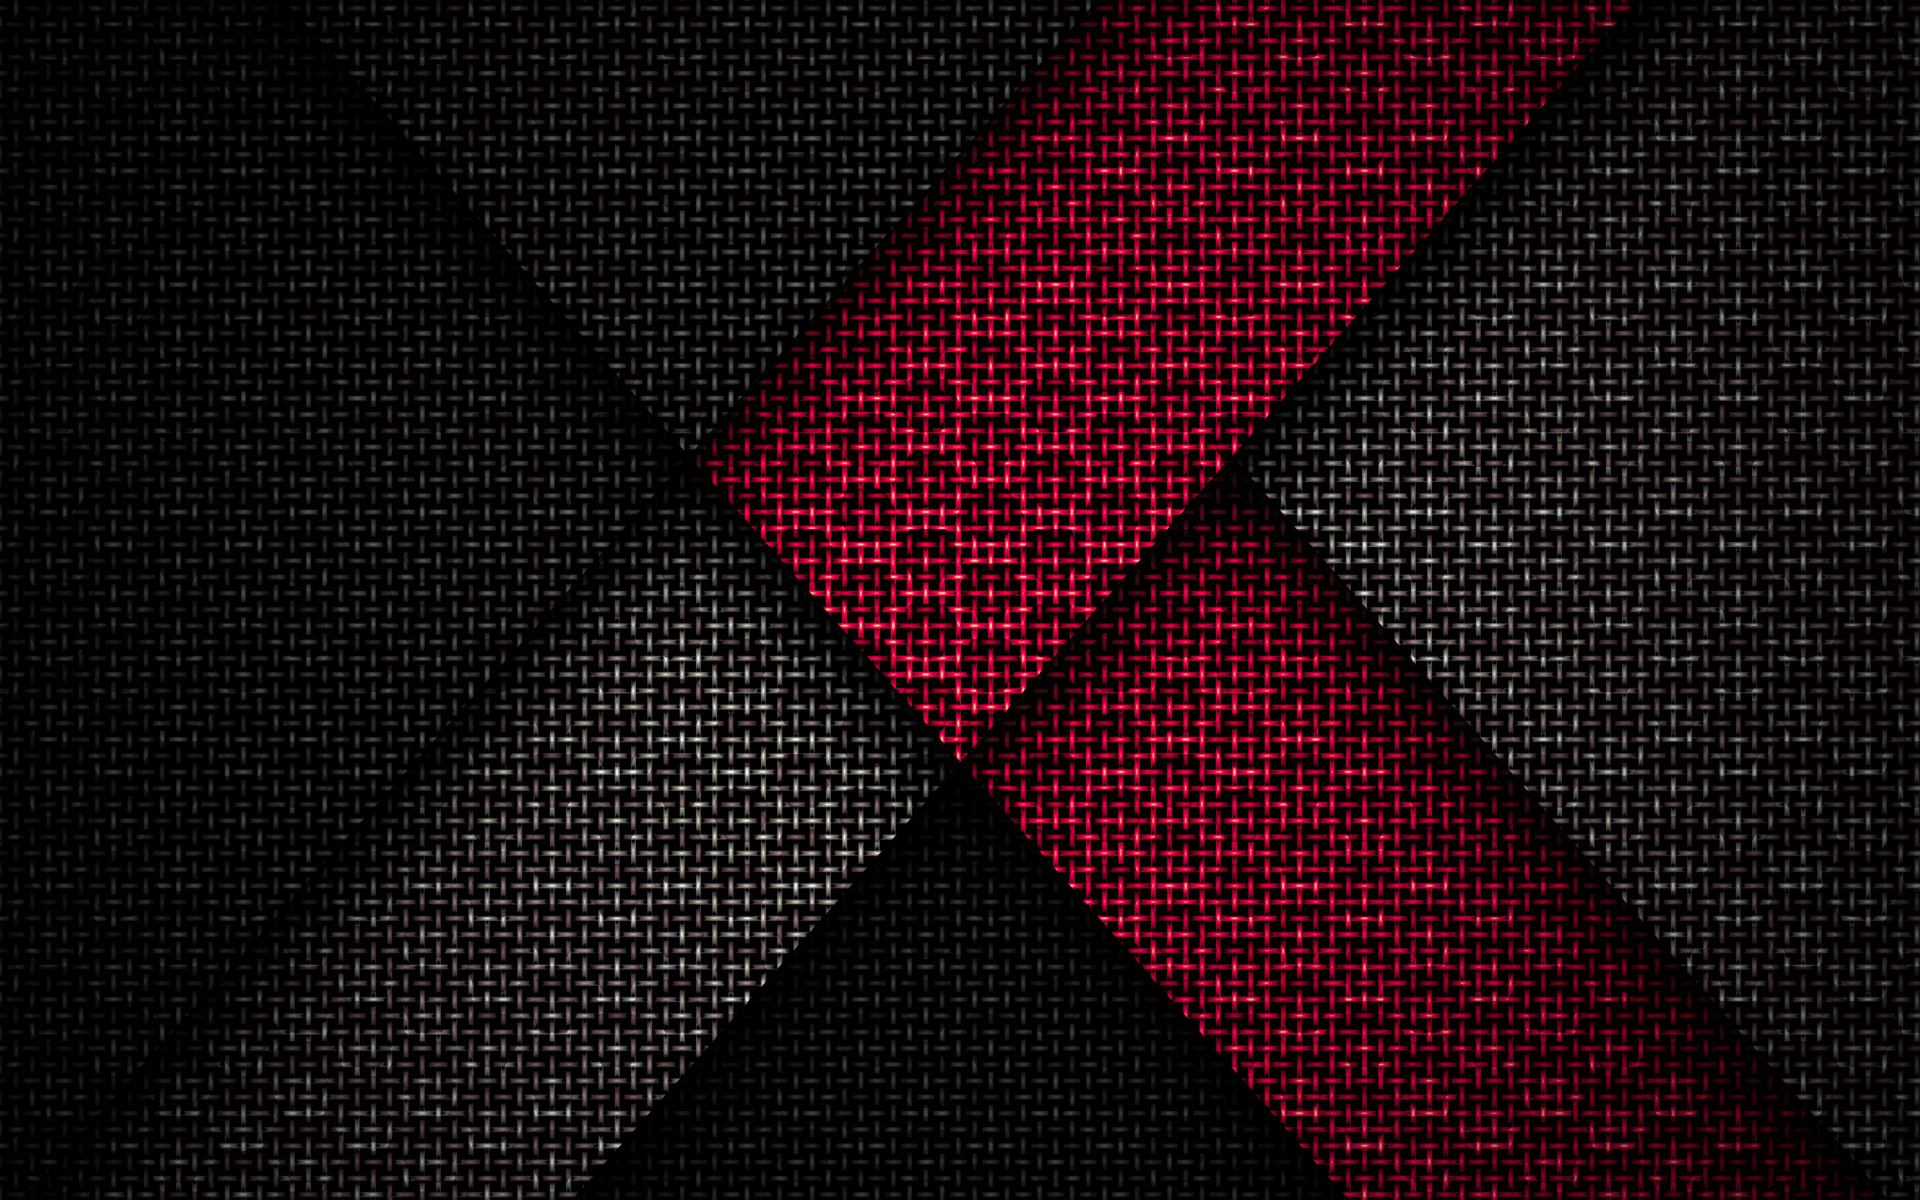 Download wallpaper 1920x1200 red-black texture, abstract, pride cross, art,  16:10 widescreen 1920x1200 hd background, 23271